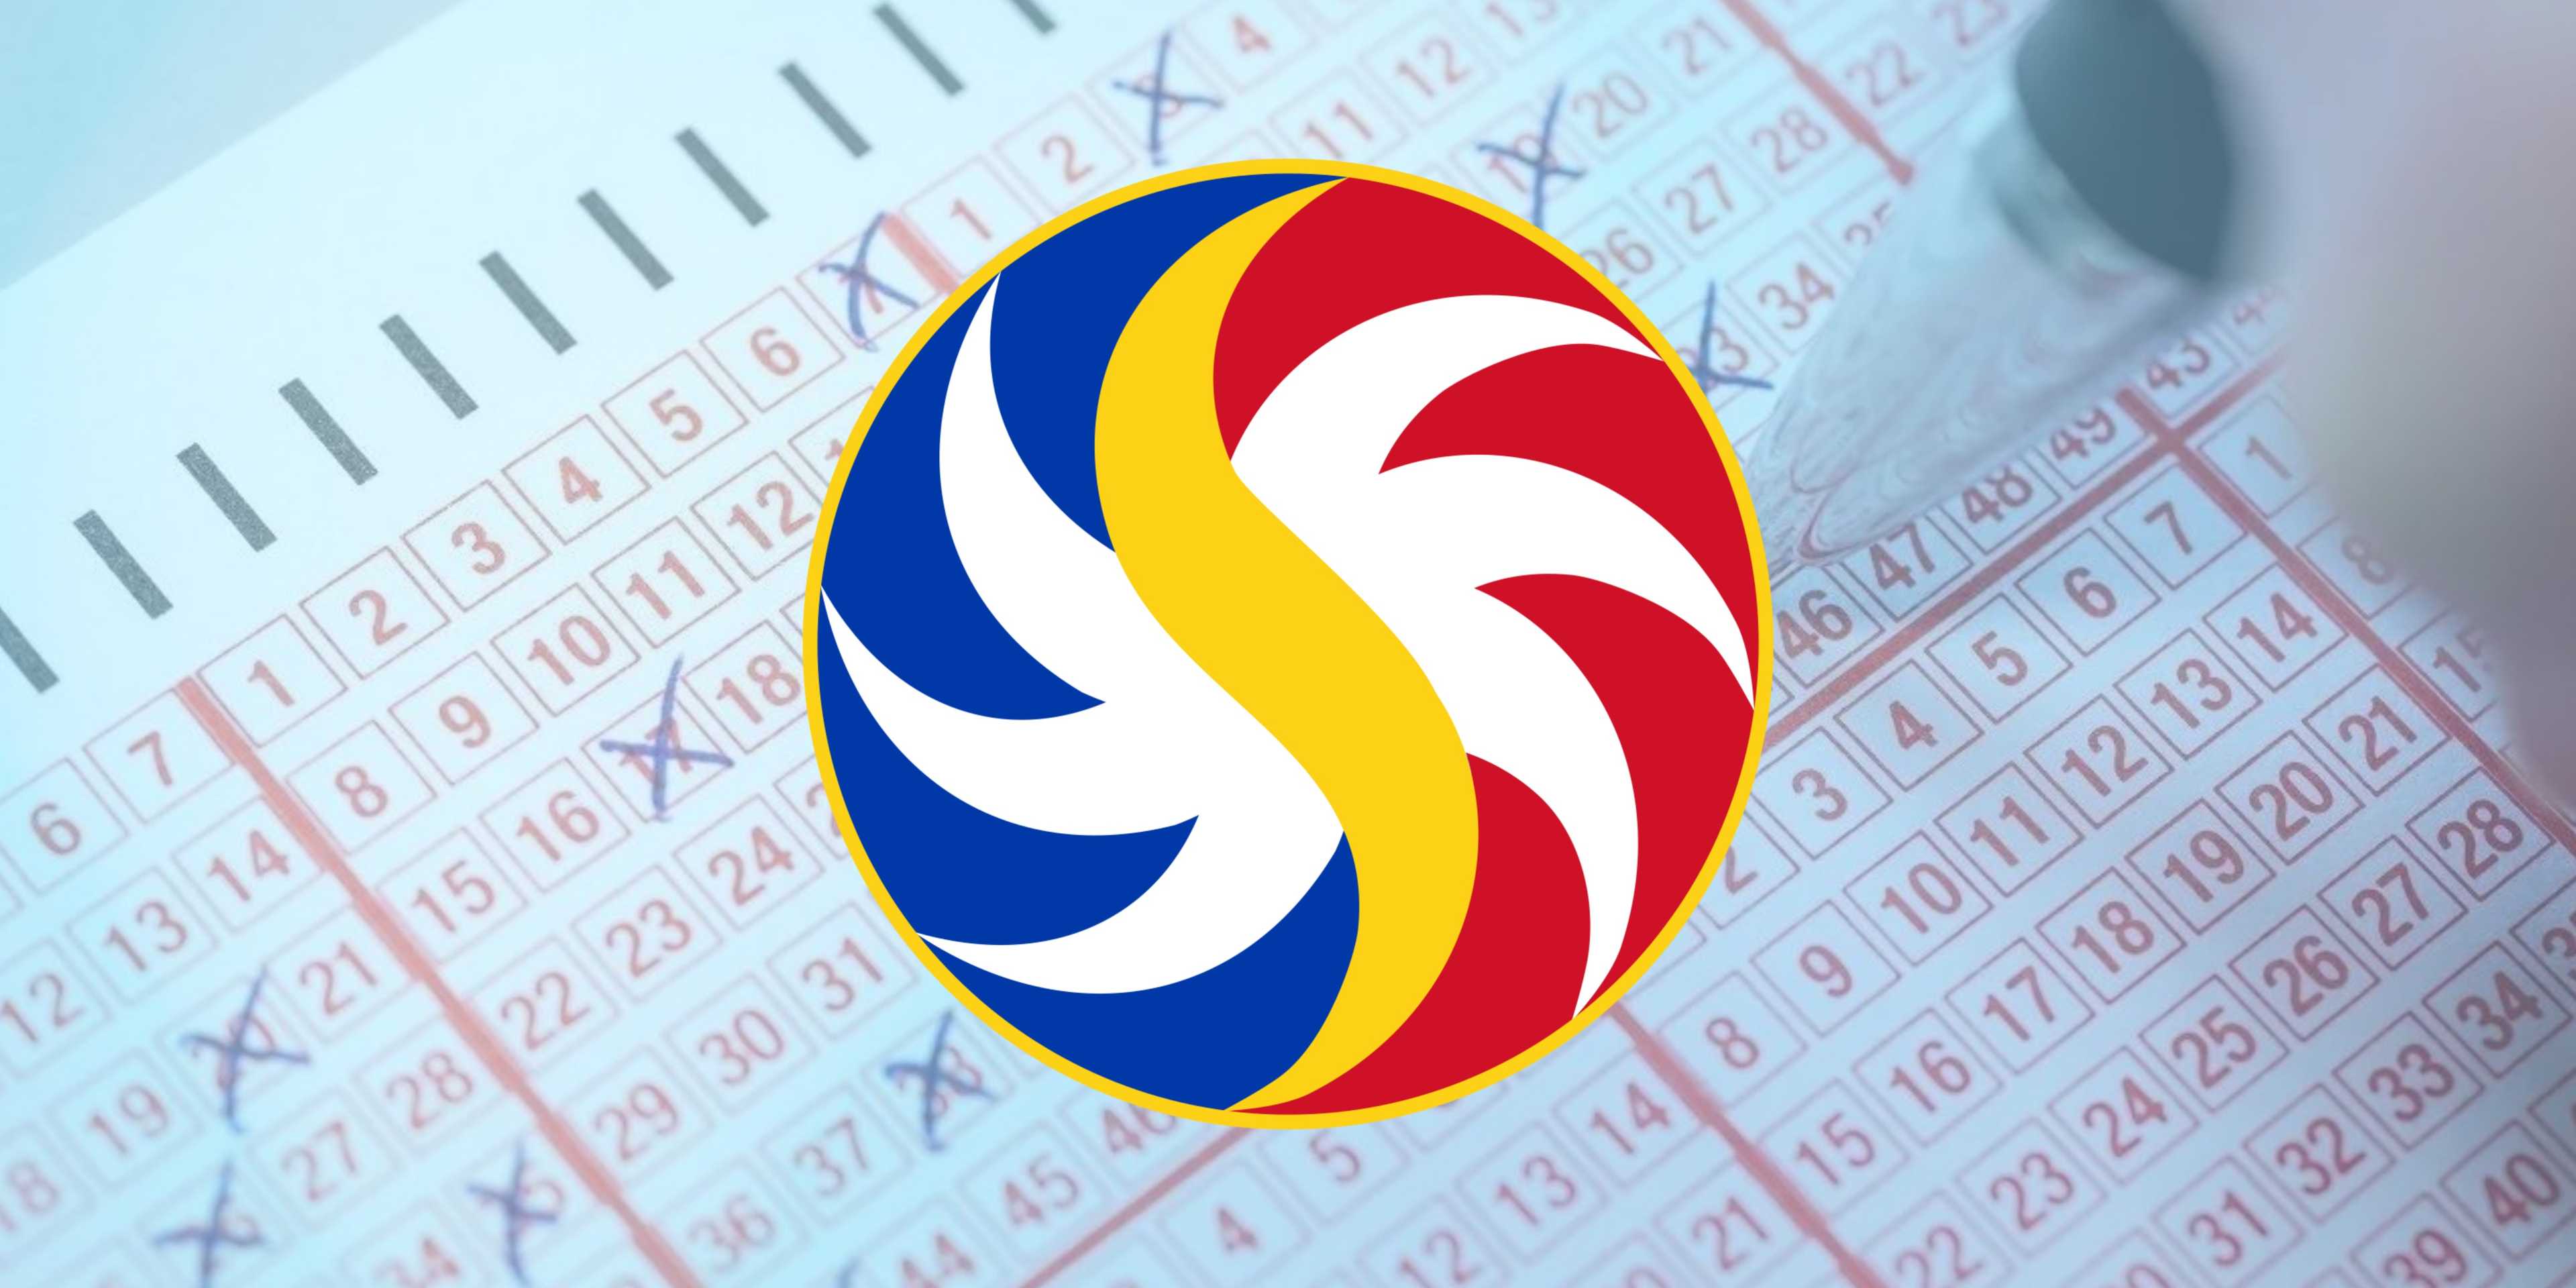 PCSO Lotto Draw Results on Wednesday, March 20